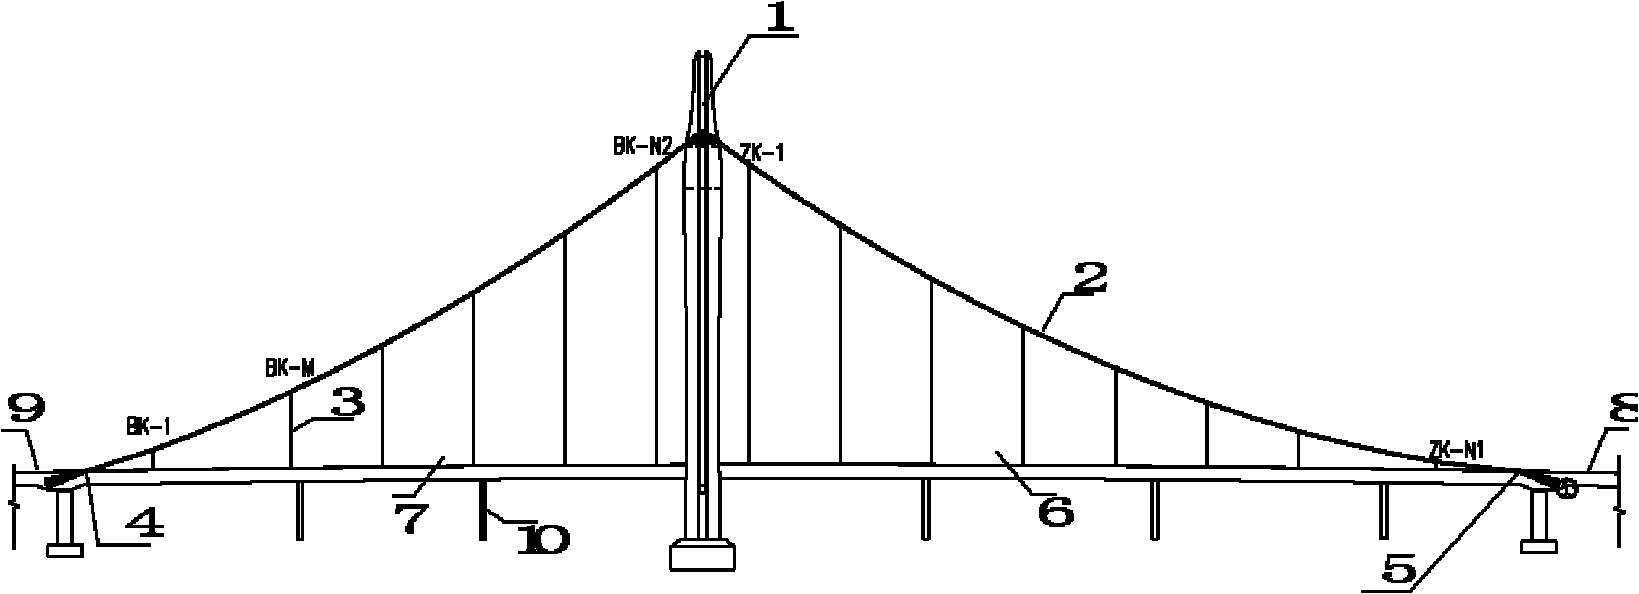 Method for stretching single-tower double-span self-anchored suspension bridge sling of side-span splay cable knot in supportless way